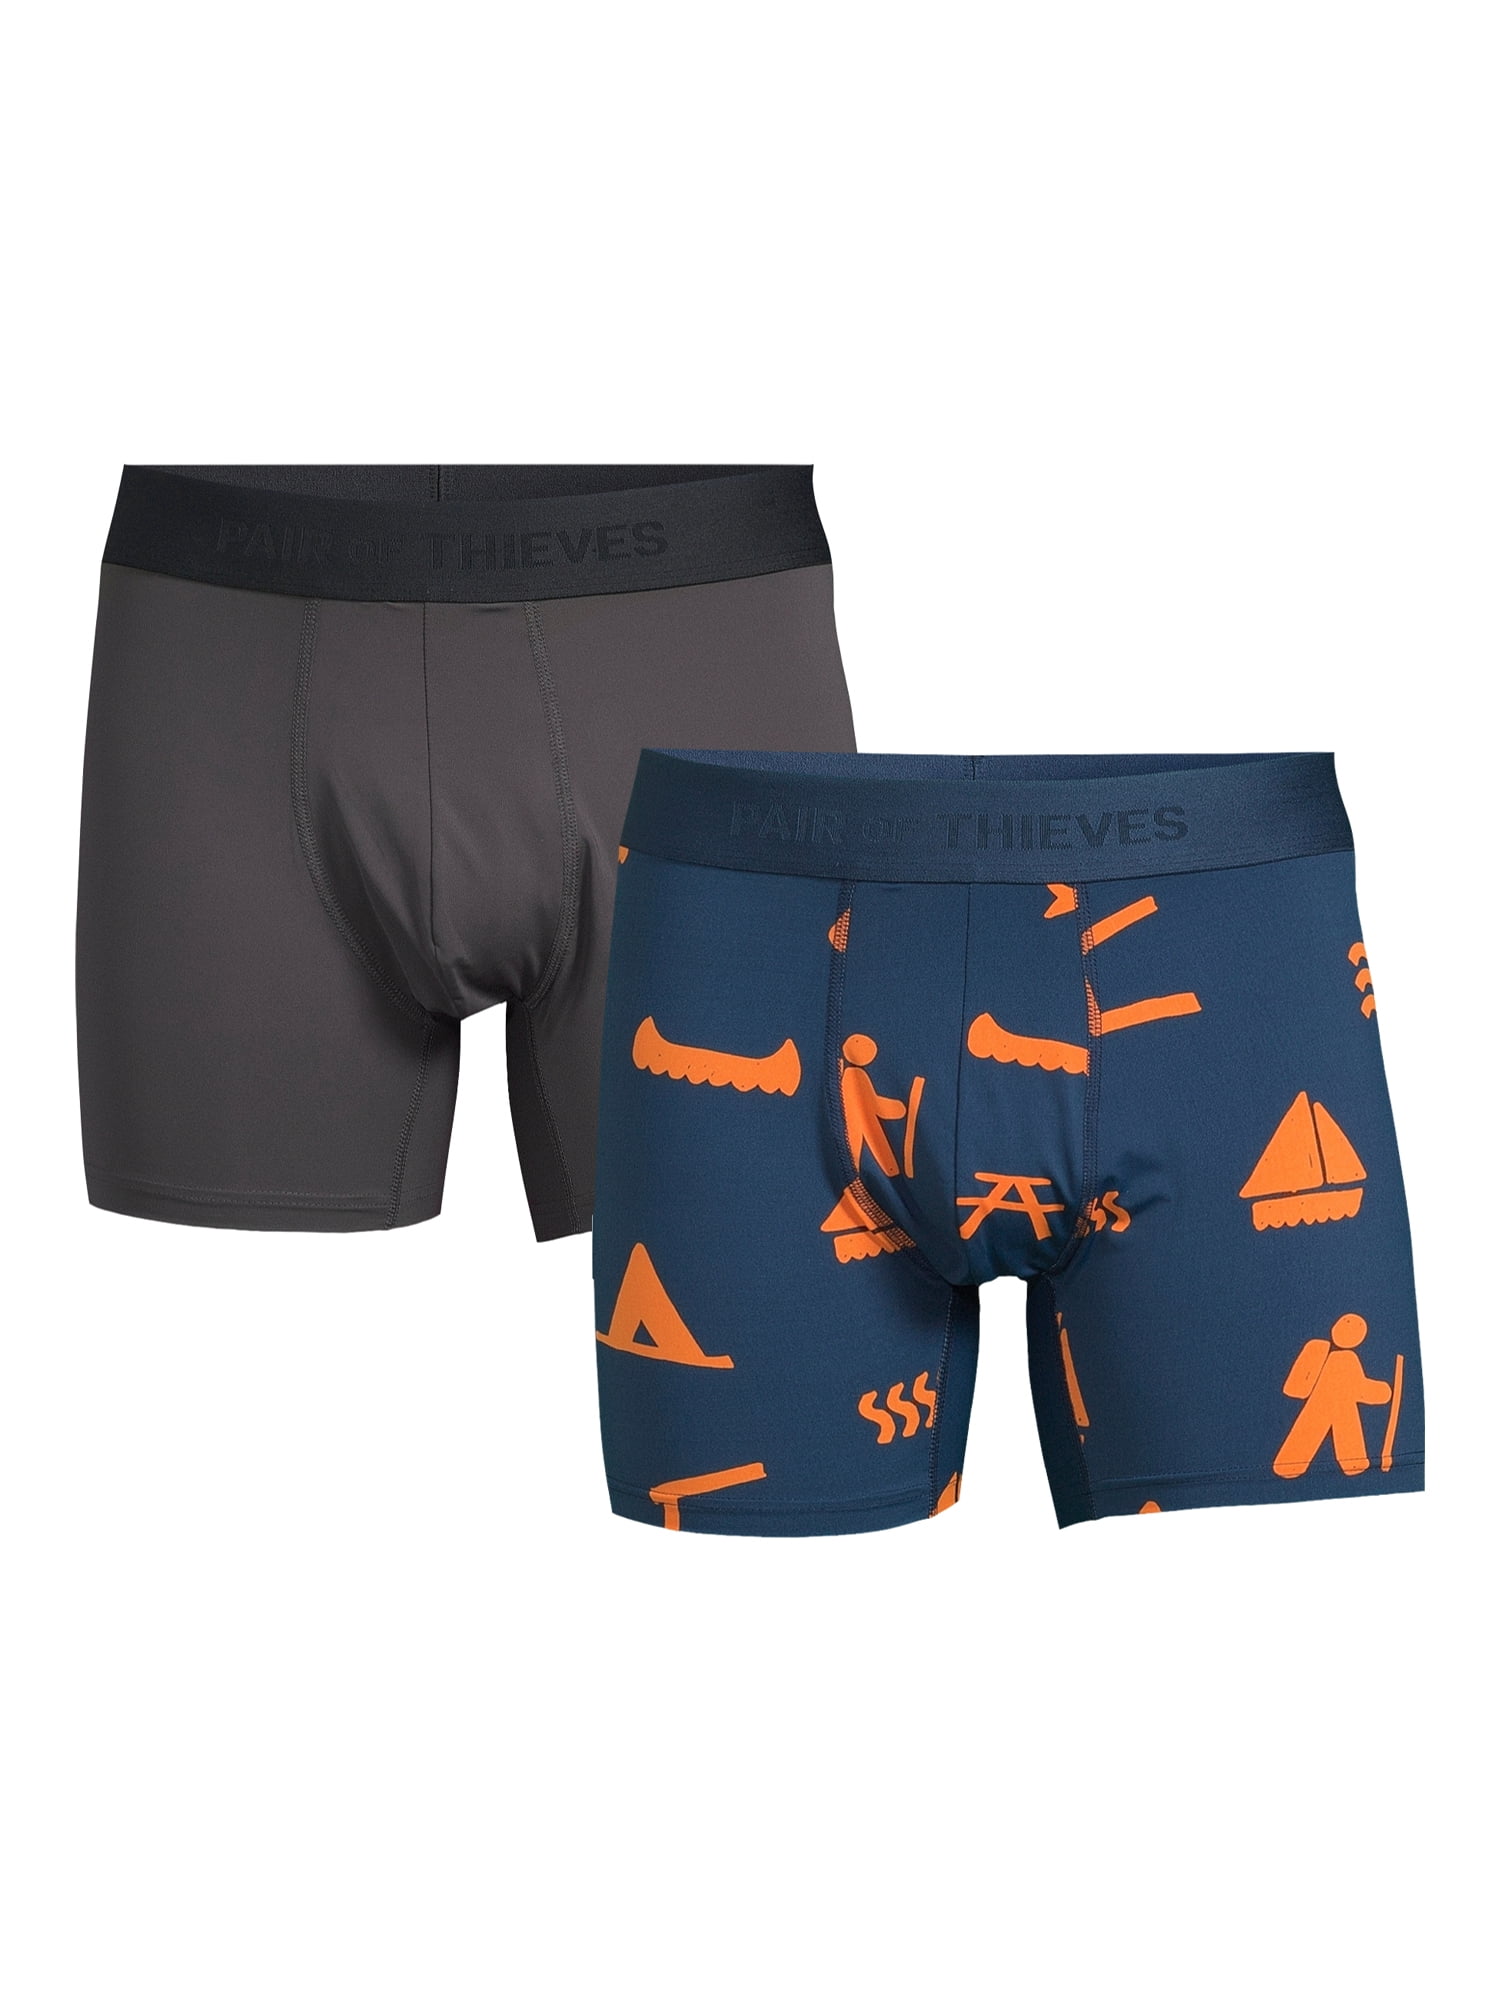 Pair of Thieves Hustle Boxer Briefs, 2-Pack, Outdoors